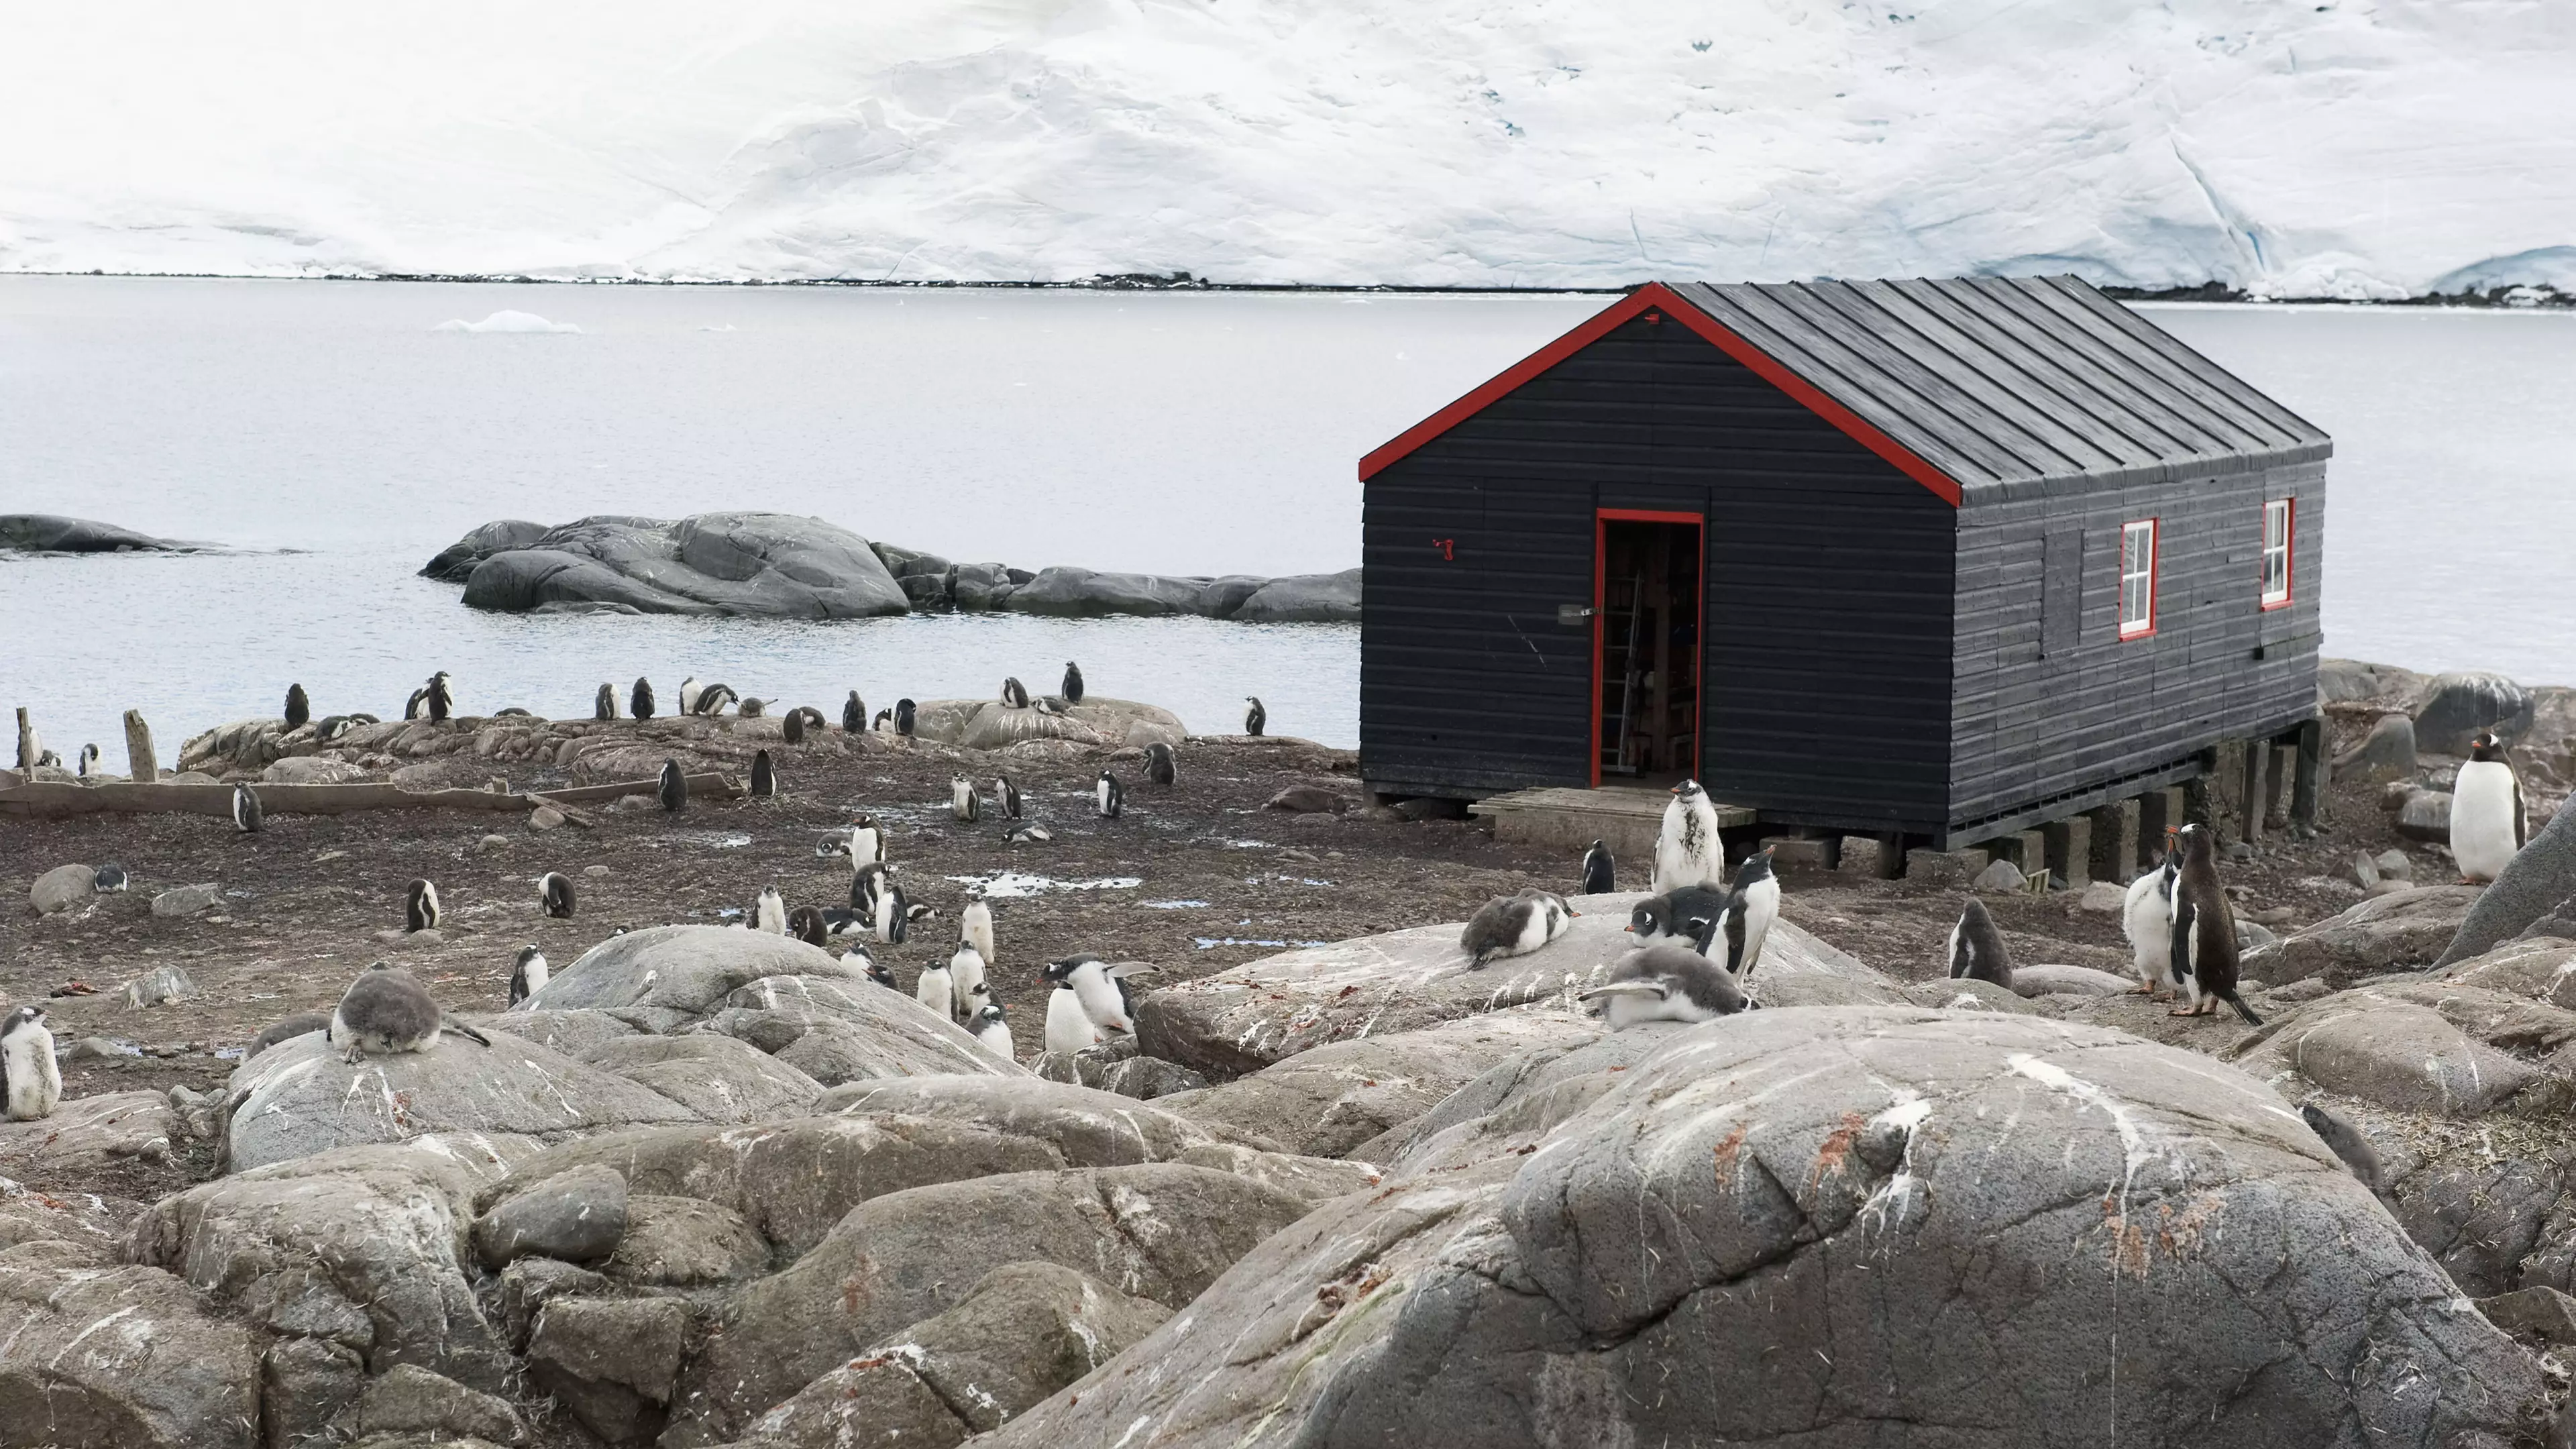 World's Most Remote Post Office Is Looking For Someone To Fill The Most Unappealing Job